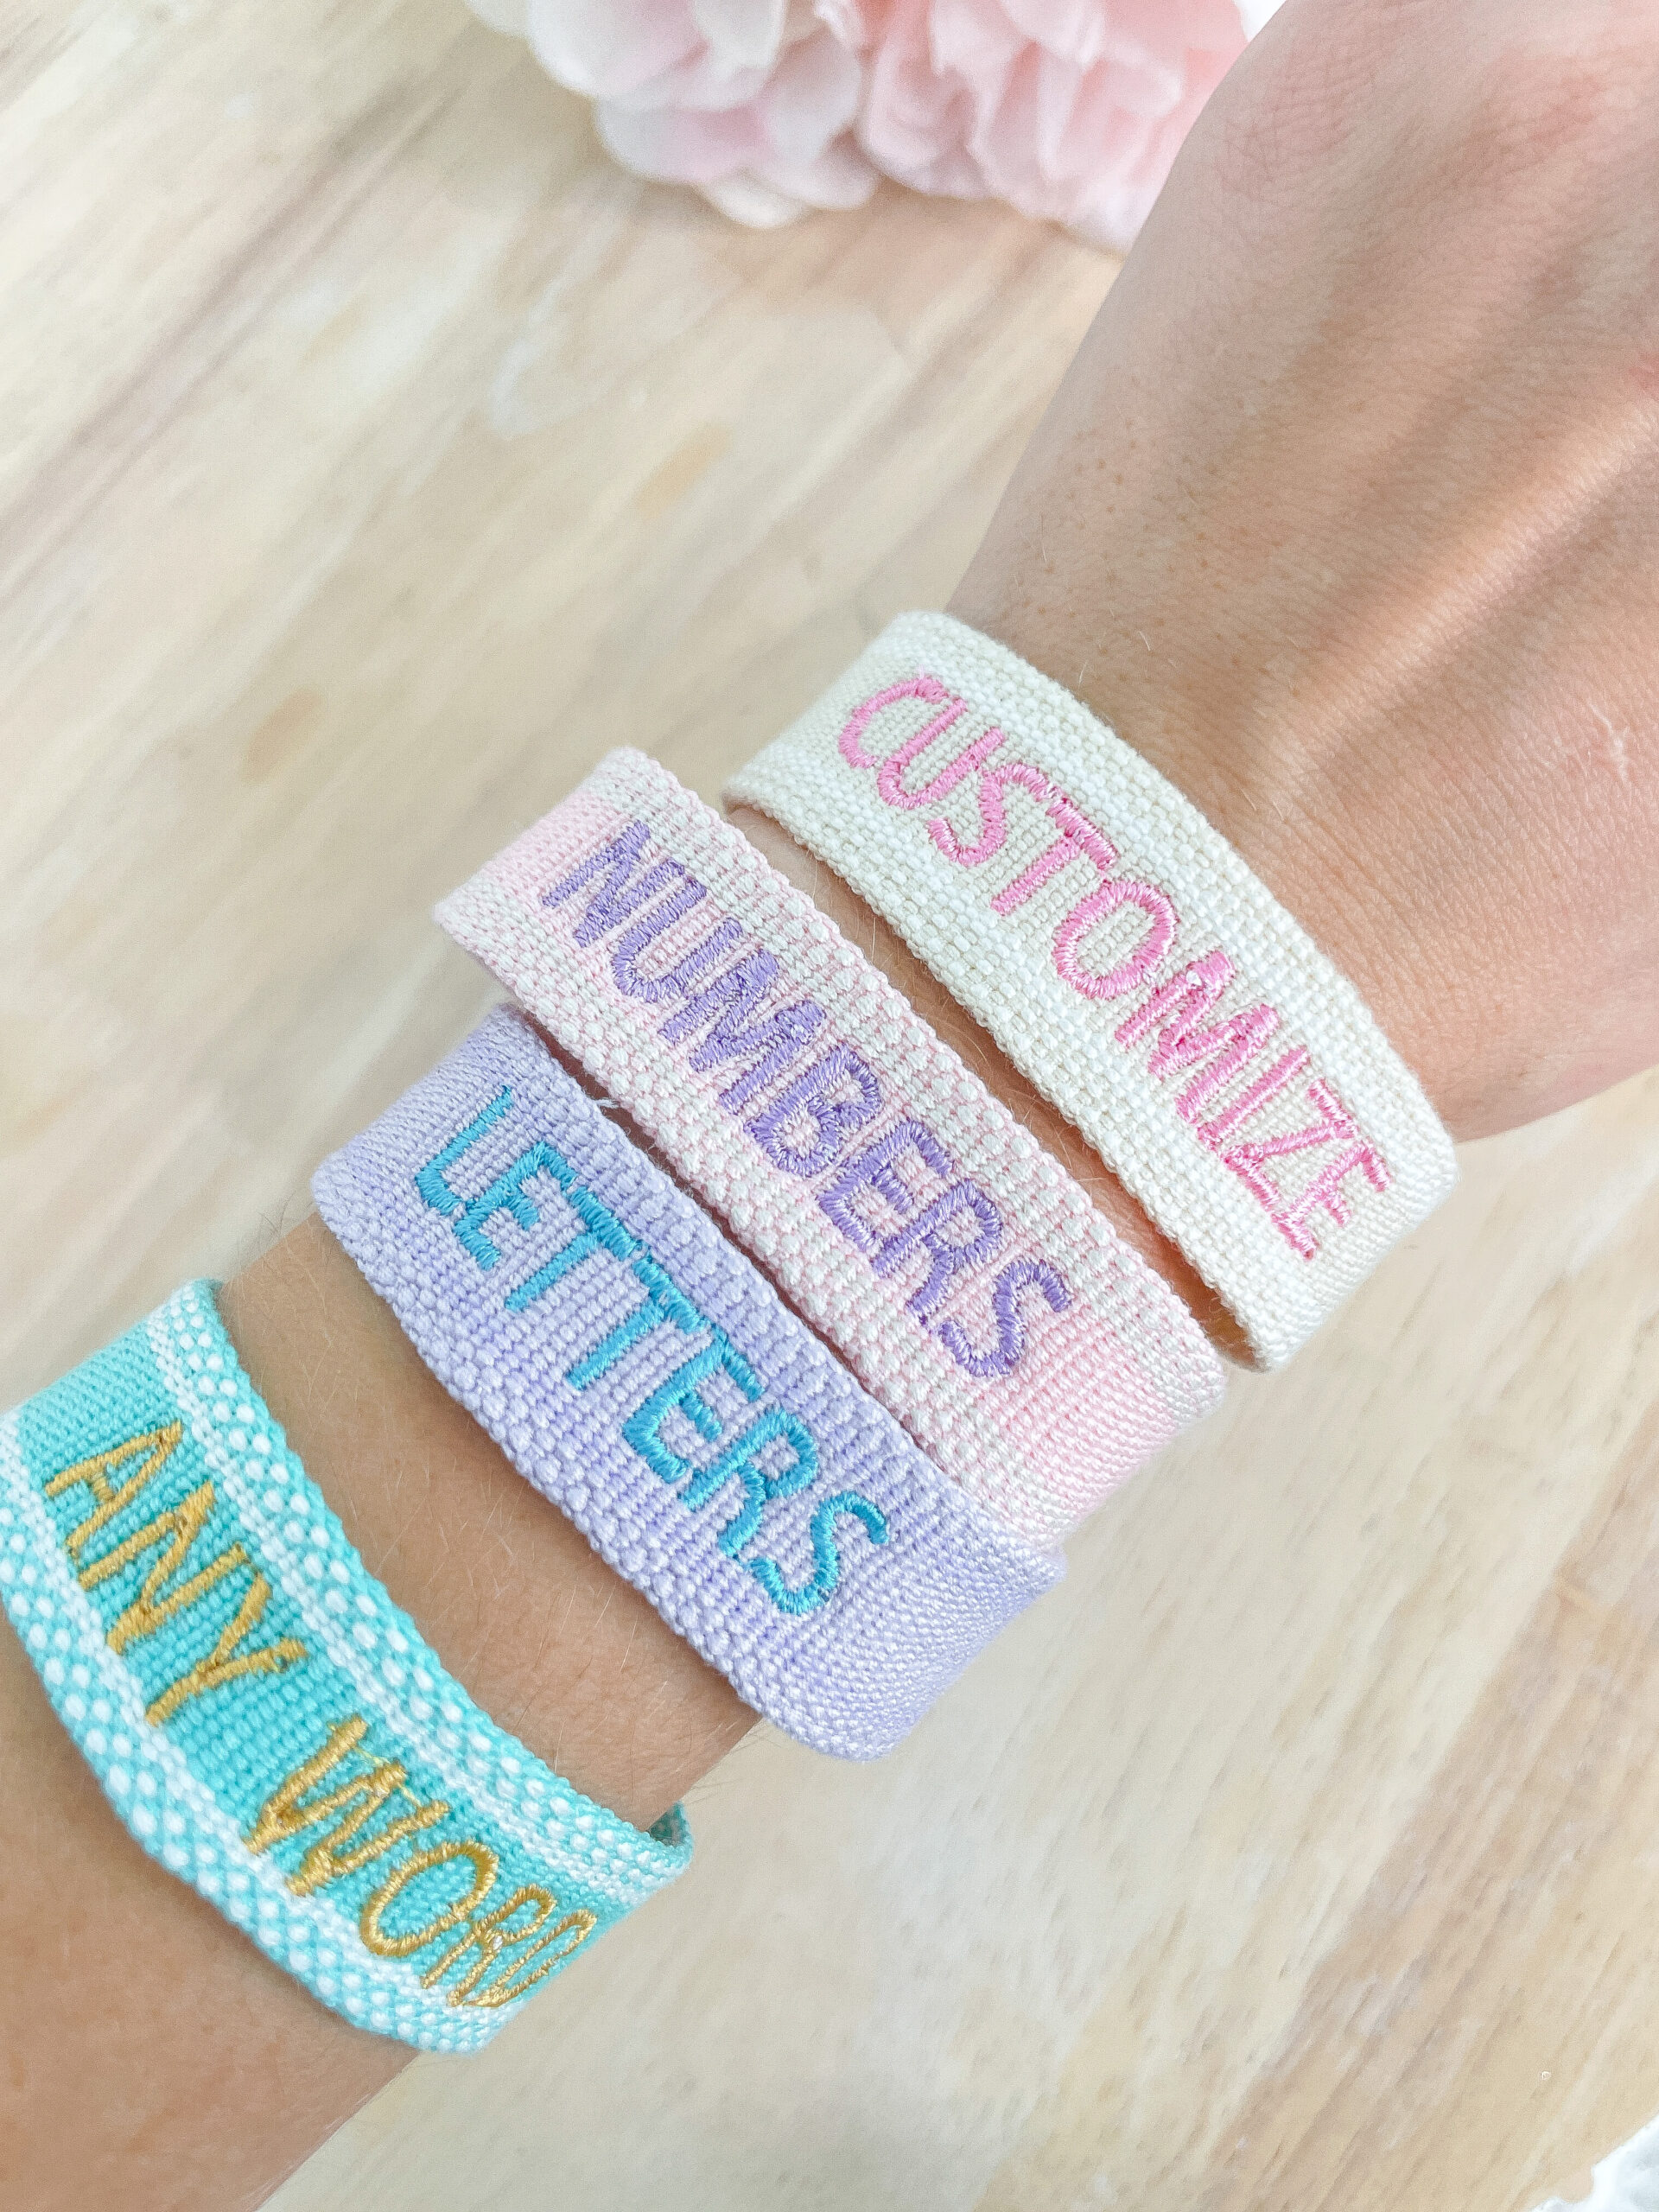 How to Make Friendship Bracelets With Names Letters and Numbers  Embroidery  floss bracelets Friendship bracelets with names Embroidery floss